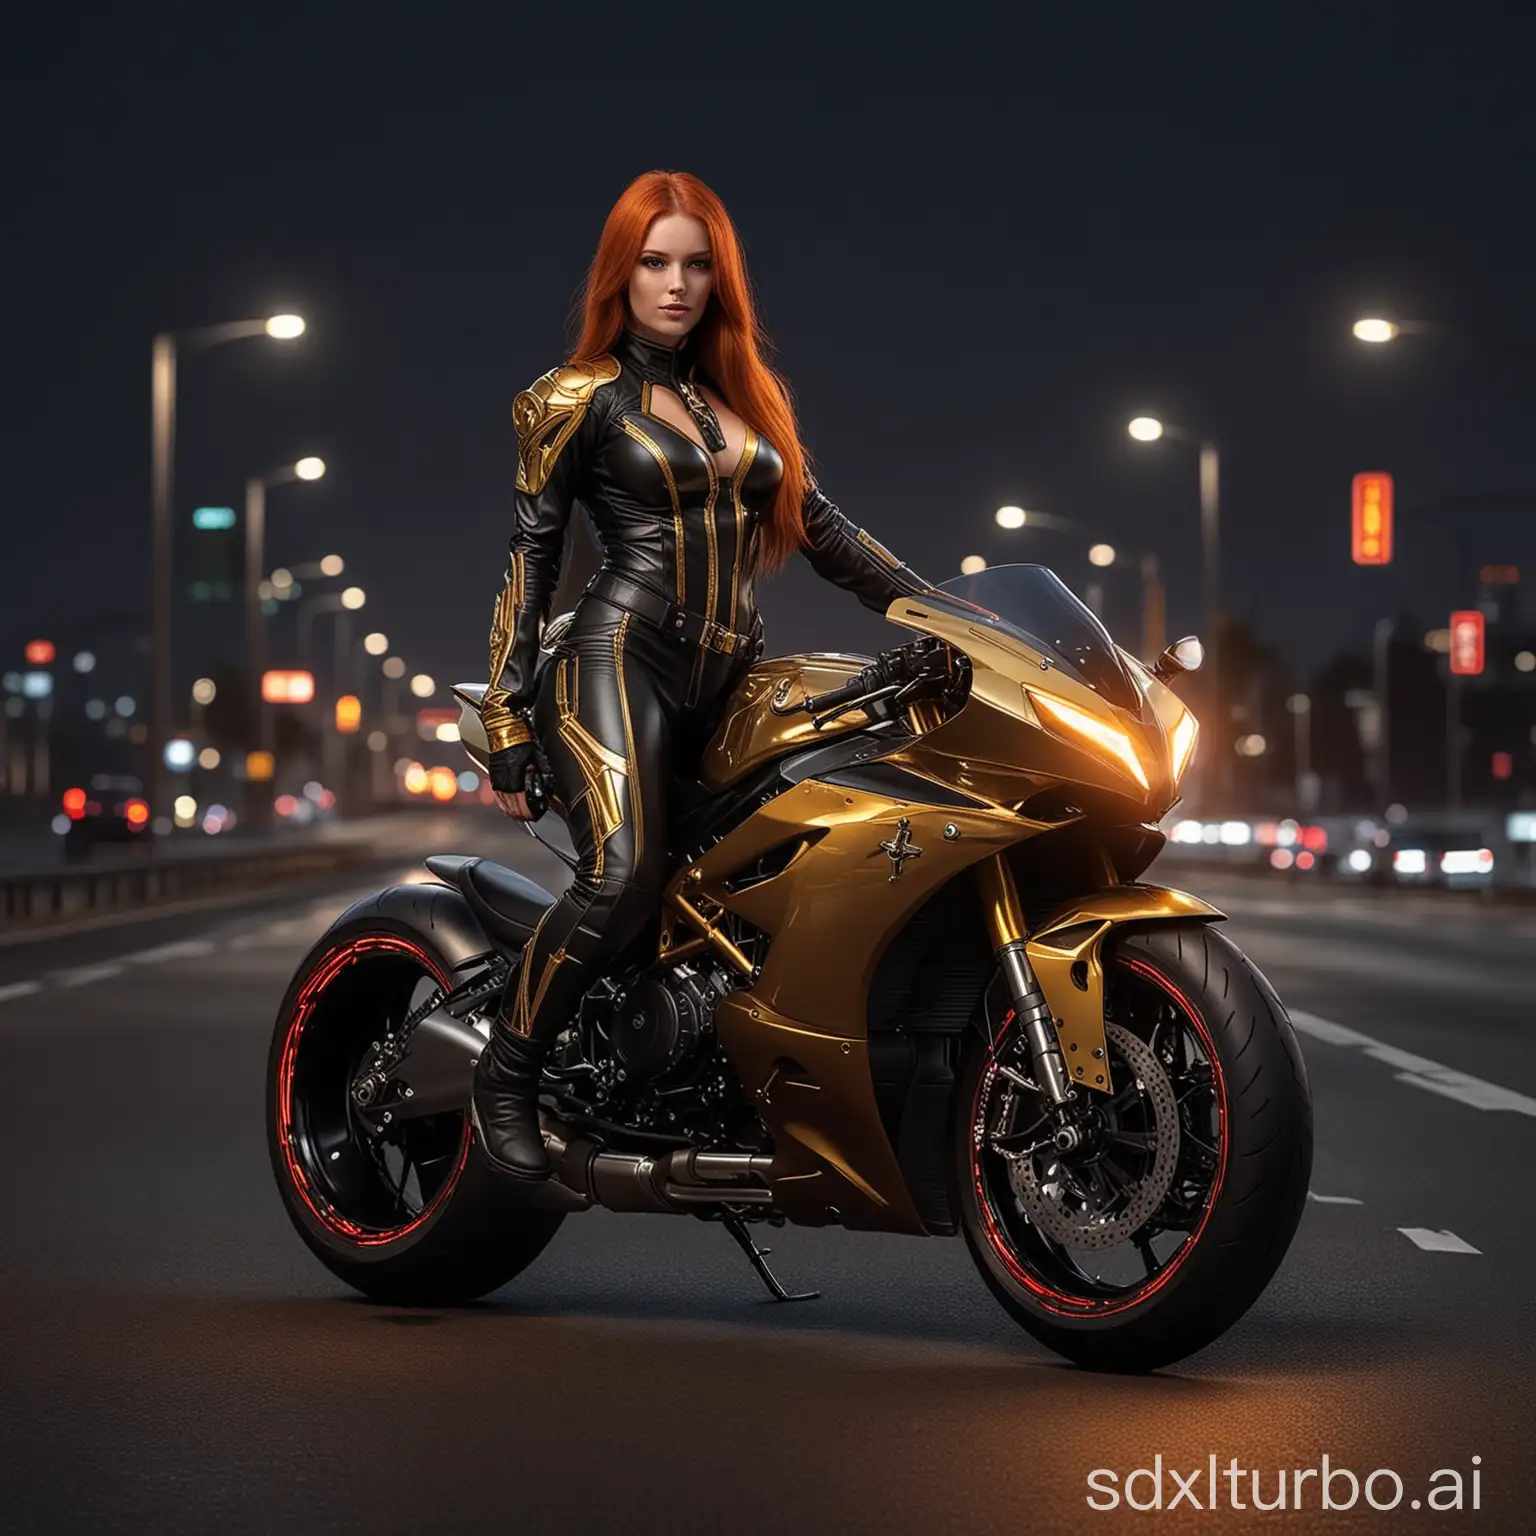 Glowing-RedHaired-Woman-Riding-Luminous-Motorcycle-at-Night